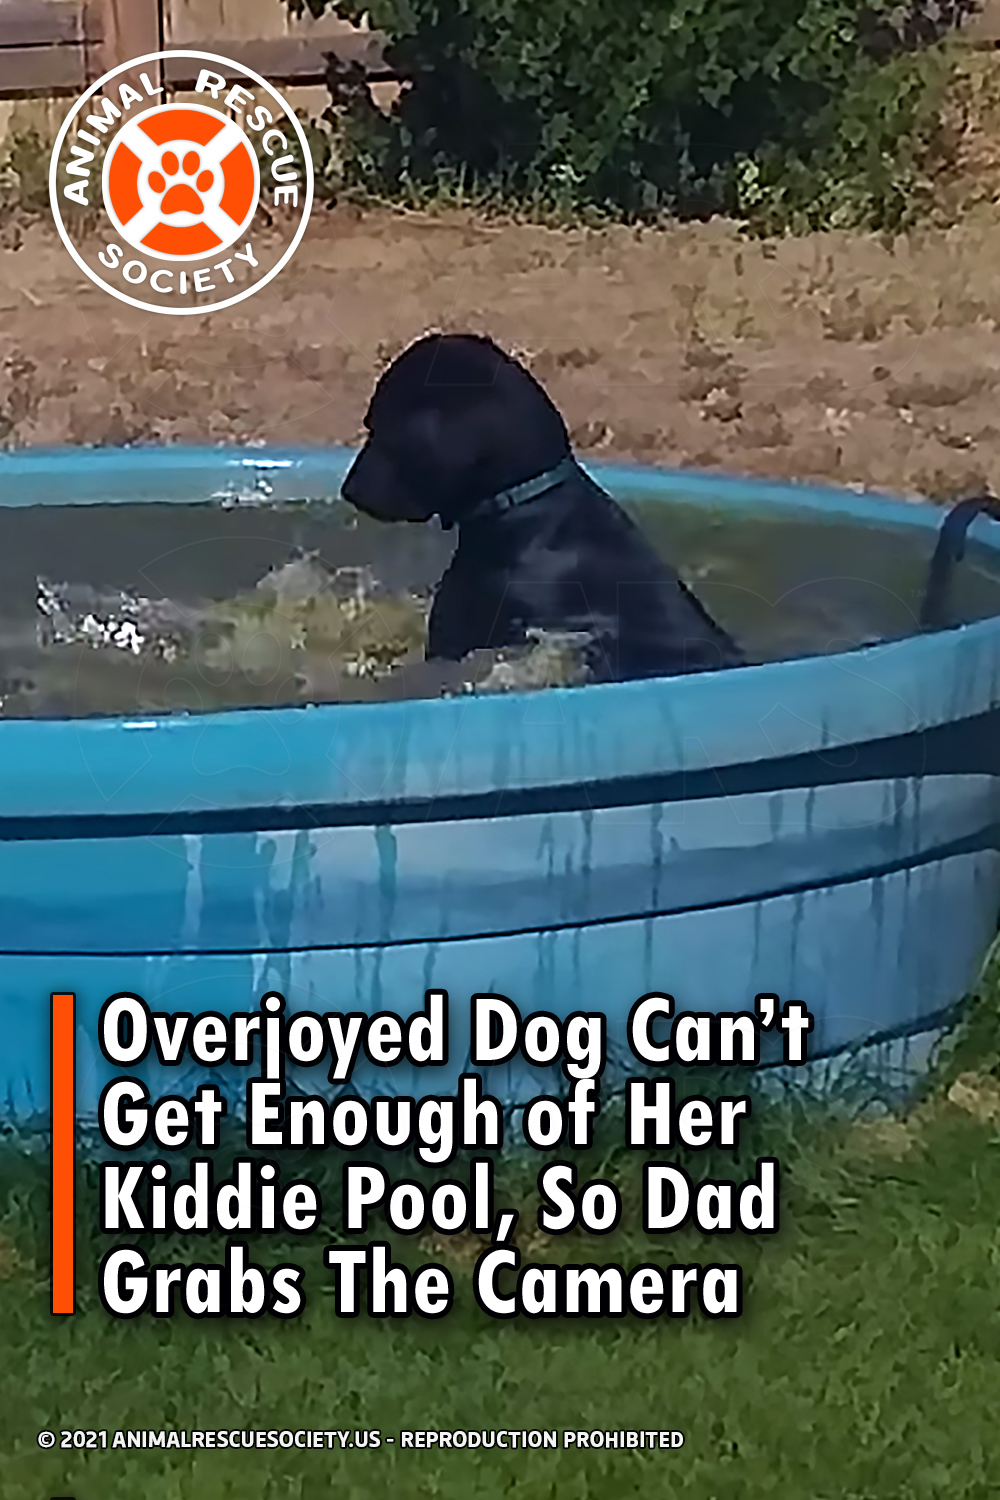 Overjoyed Dog Can’t Get Enough of Her Kiddie Pool, So Dad Grabs The Camera